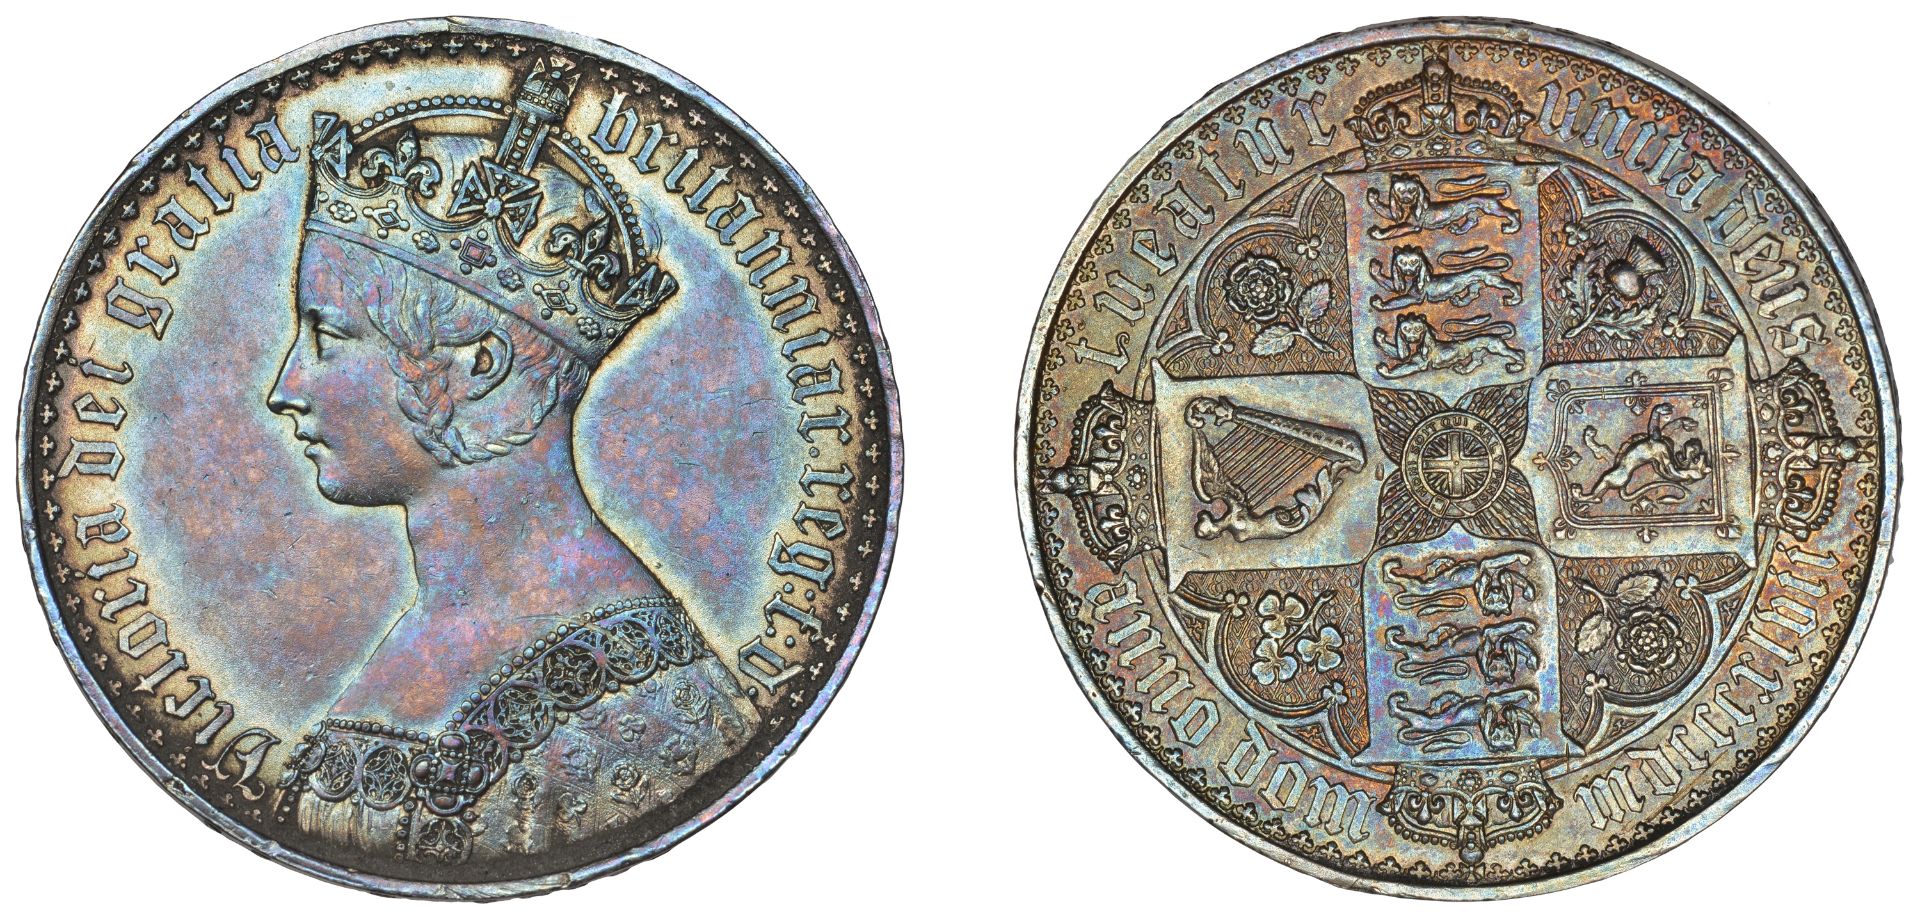 Victoria (1837-1901), 'Gothic' Crown, 1847, edge undecimo (ESC 2571; S 3883). Removed from a...